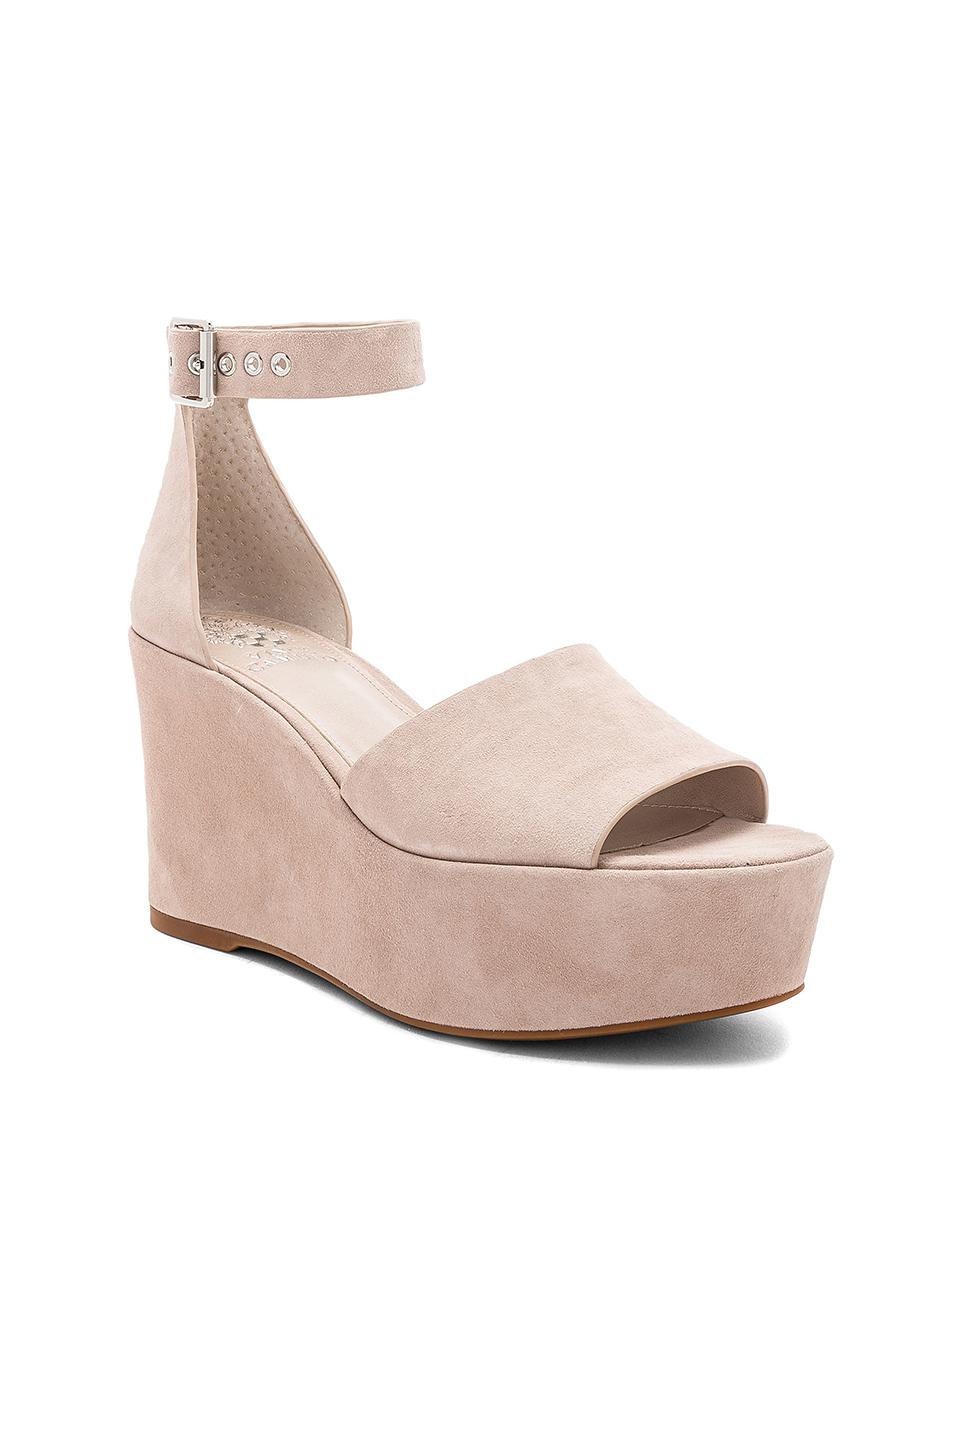 Vince Camuto Suede Korista Wedge - Lyst